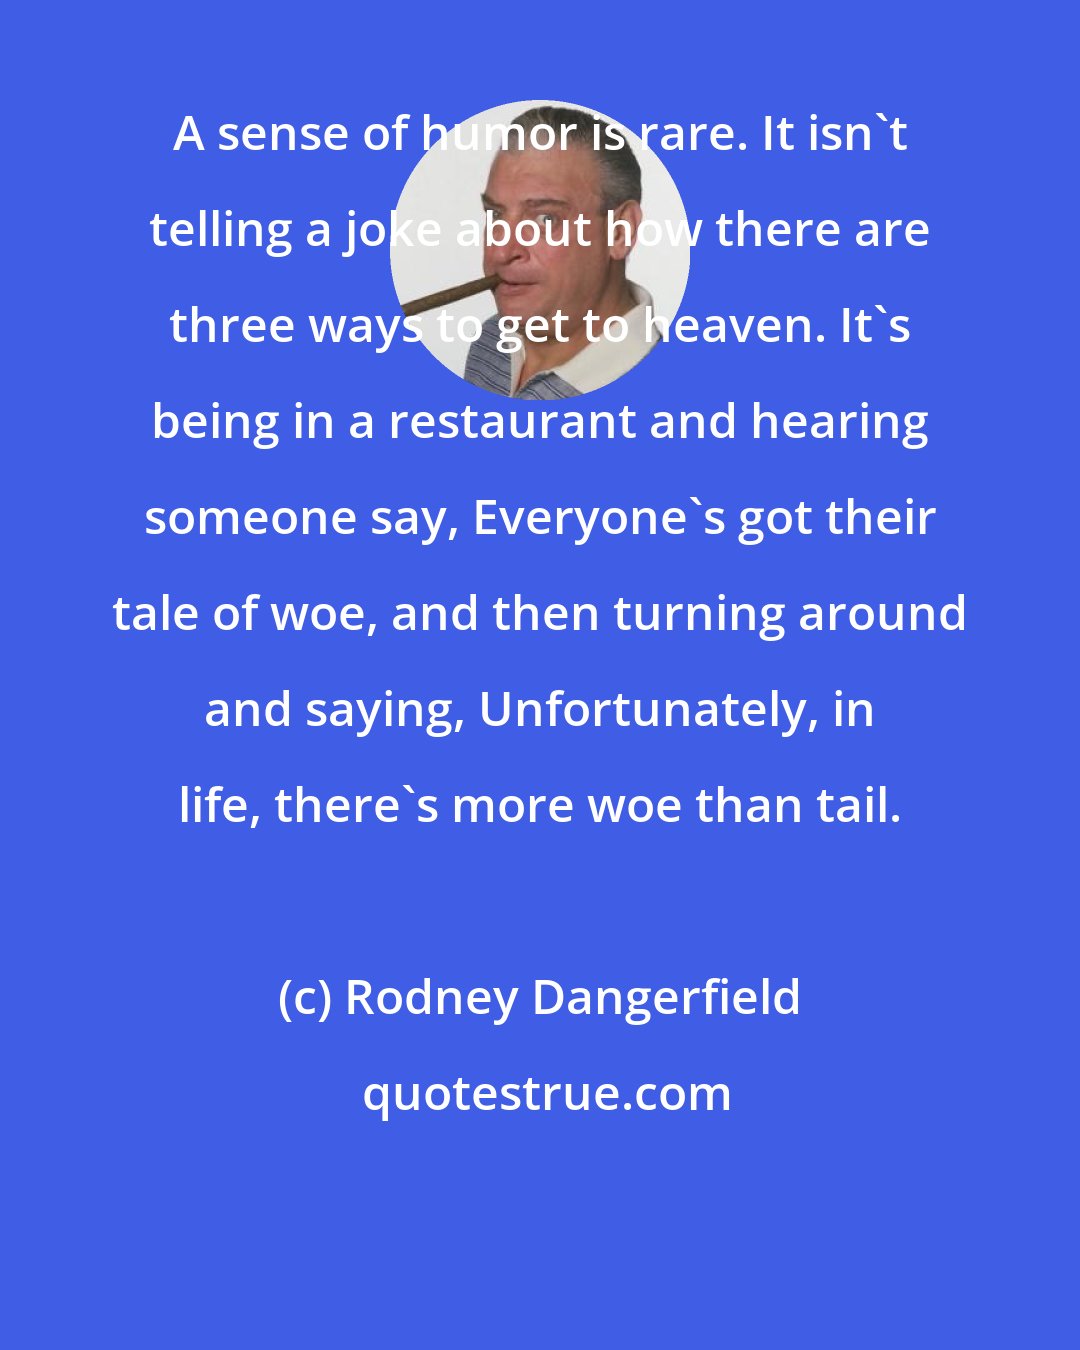 Rodney Dangerfield: A sense of humor is rare. It isn't telling a joke about how there are three ways to get to heaven. It's being in a restaurant and hearing someone say, Everyone's got their tale of woe, and then turning around and saying, Unfortunately, in life, there's more woe than tail.